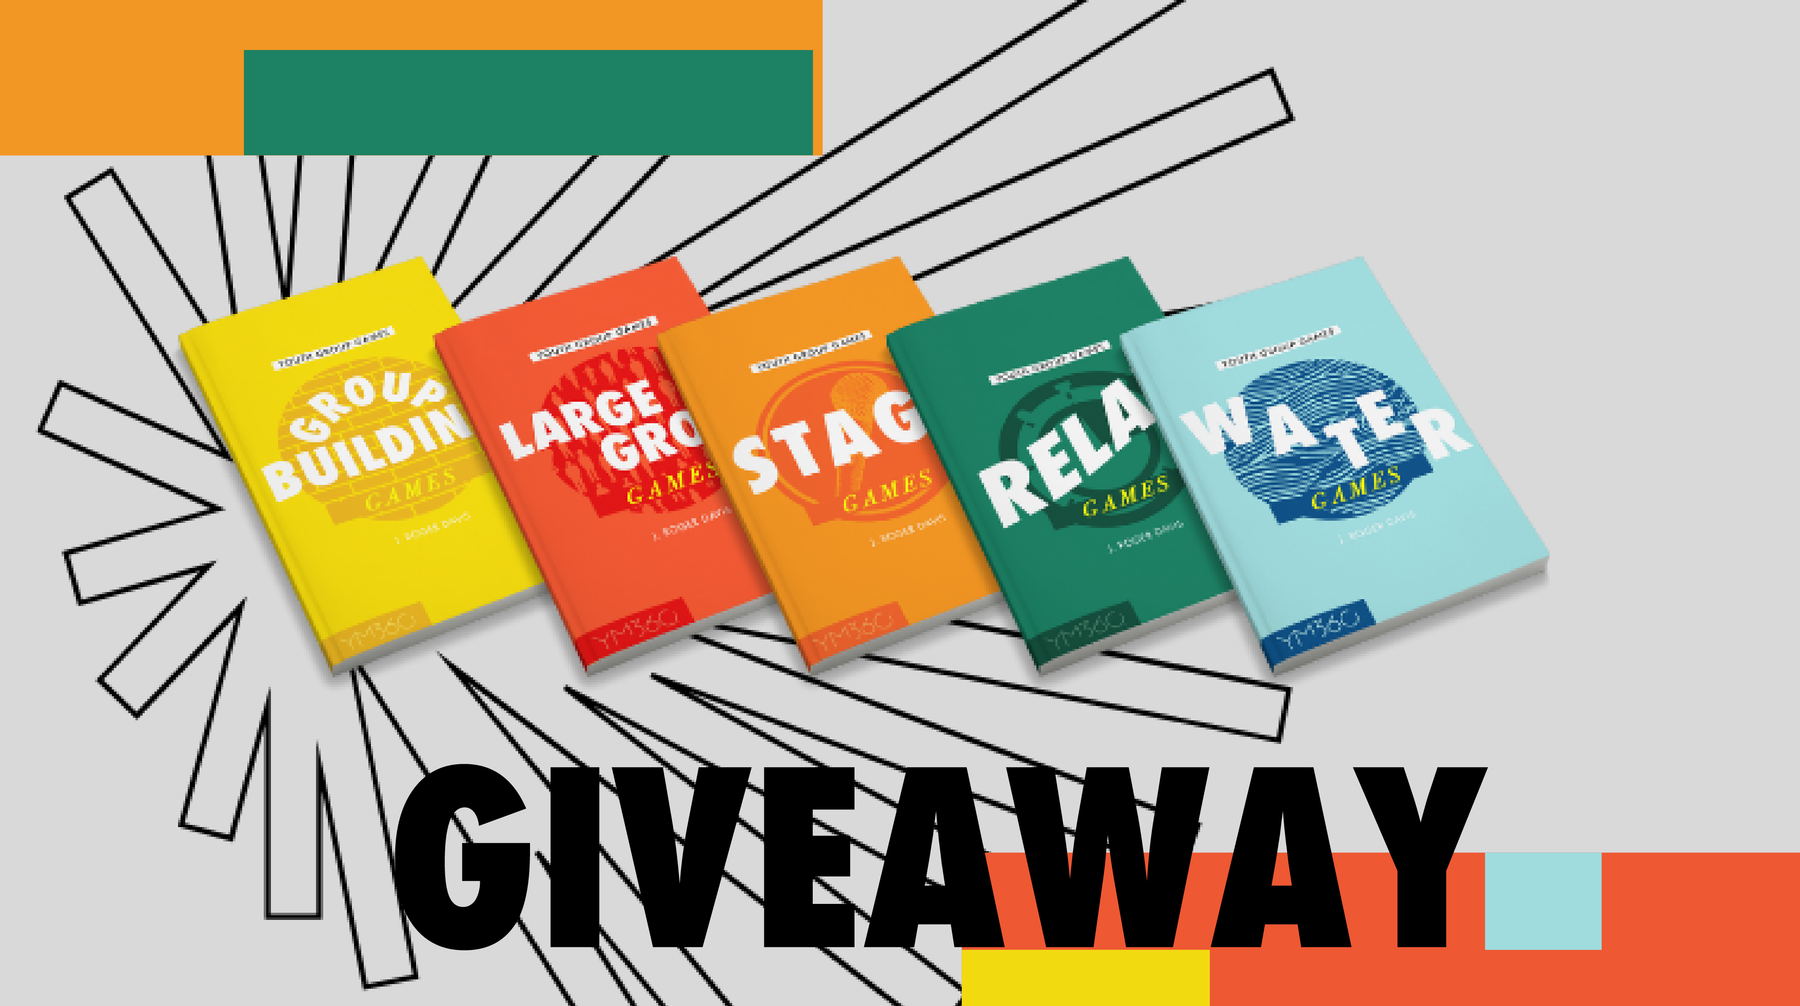 Games Books Giveaway